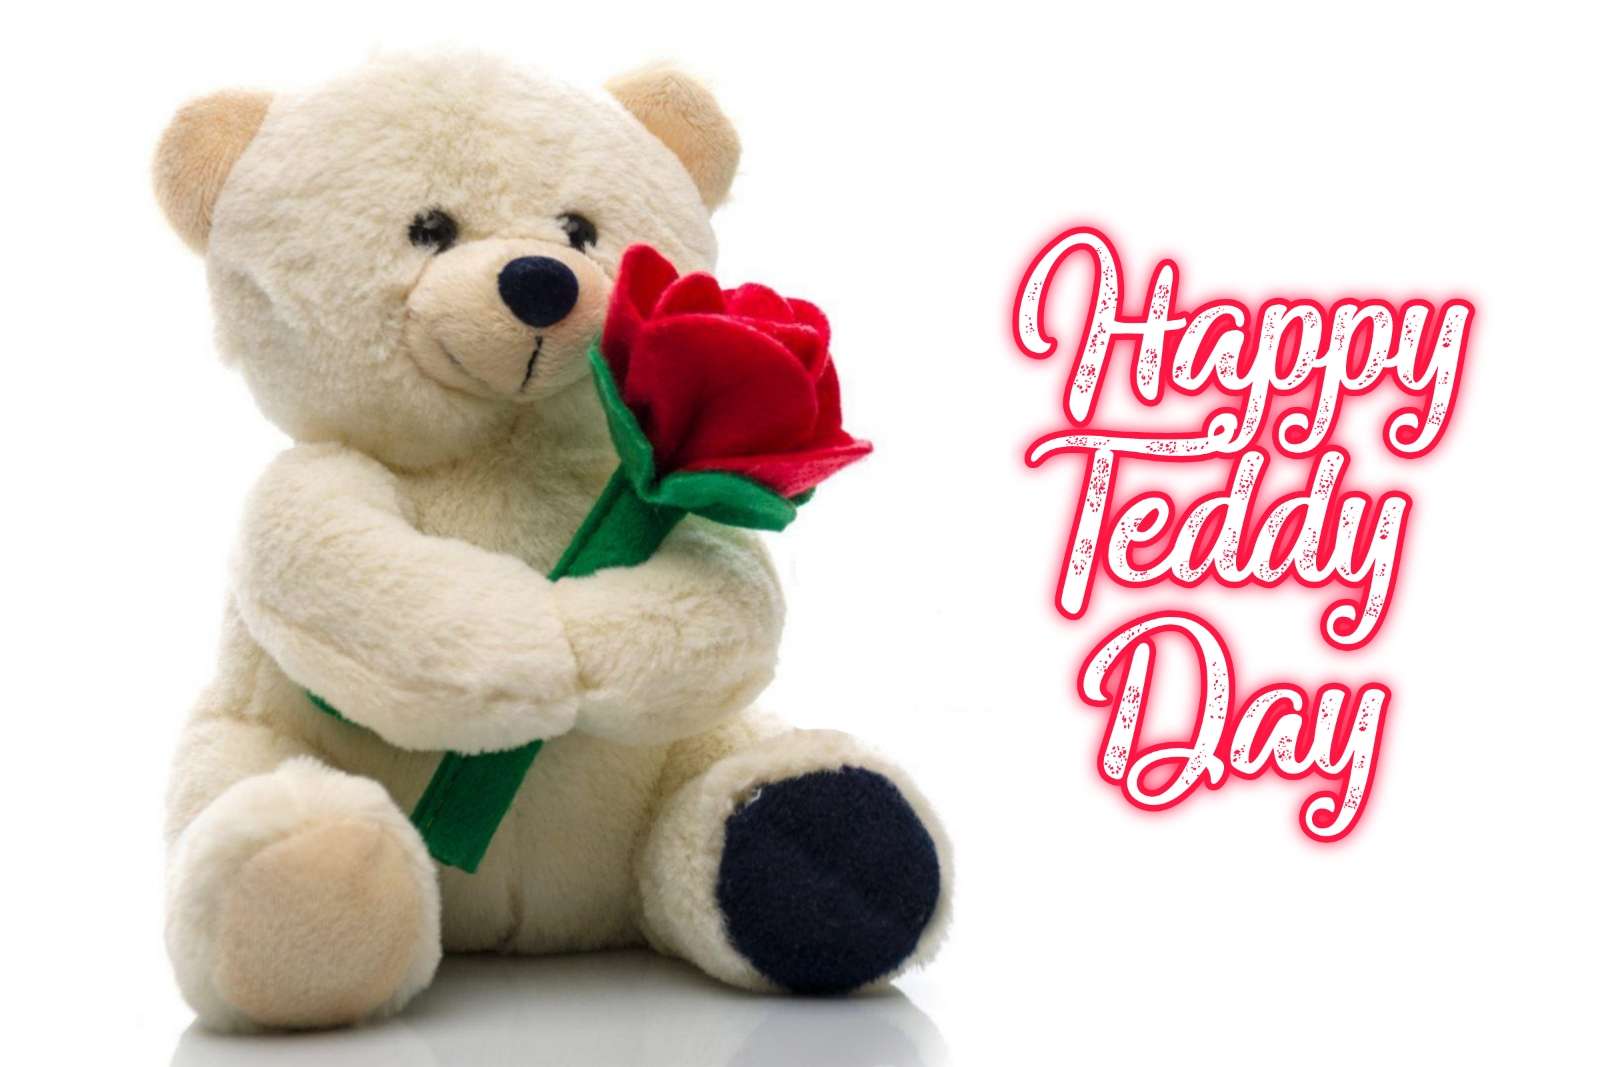 Happy Teddy Day Pic 2022 Download